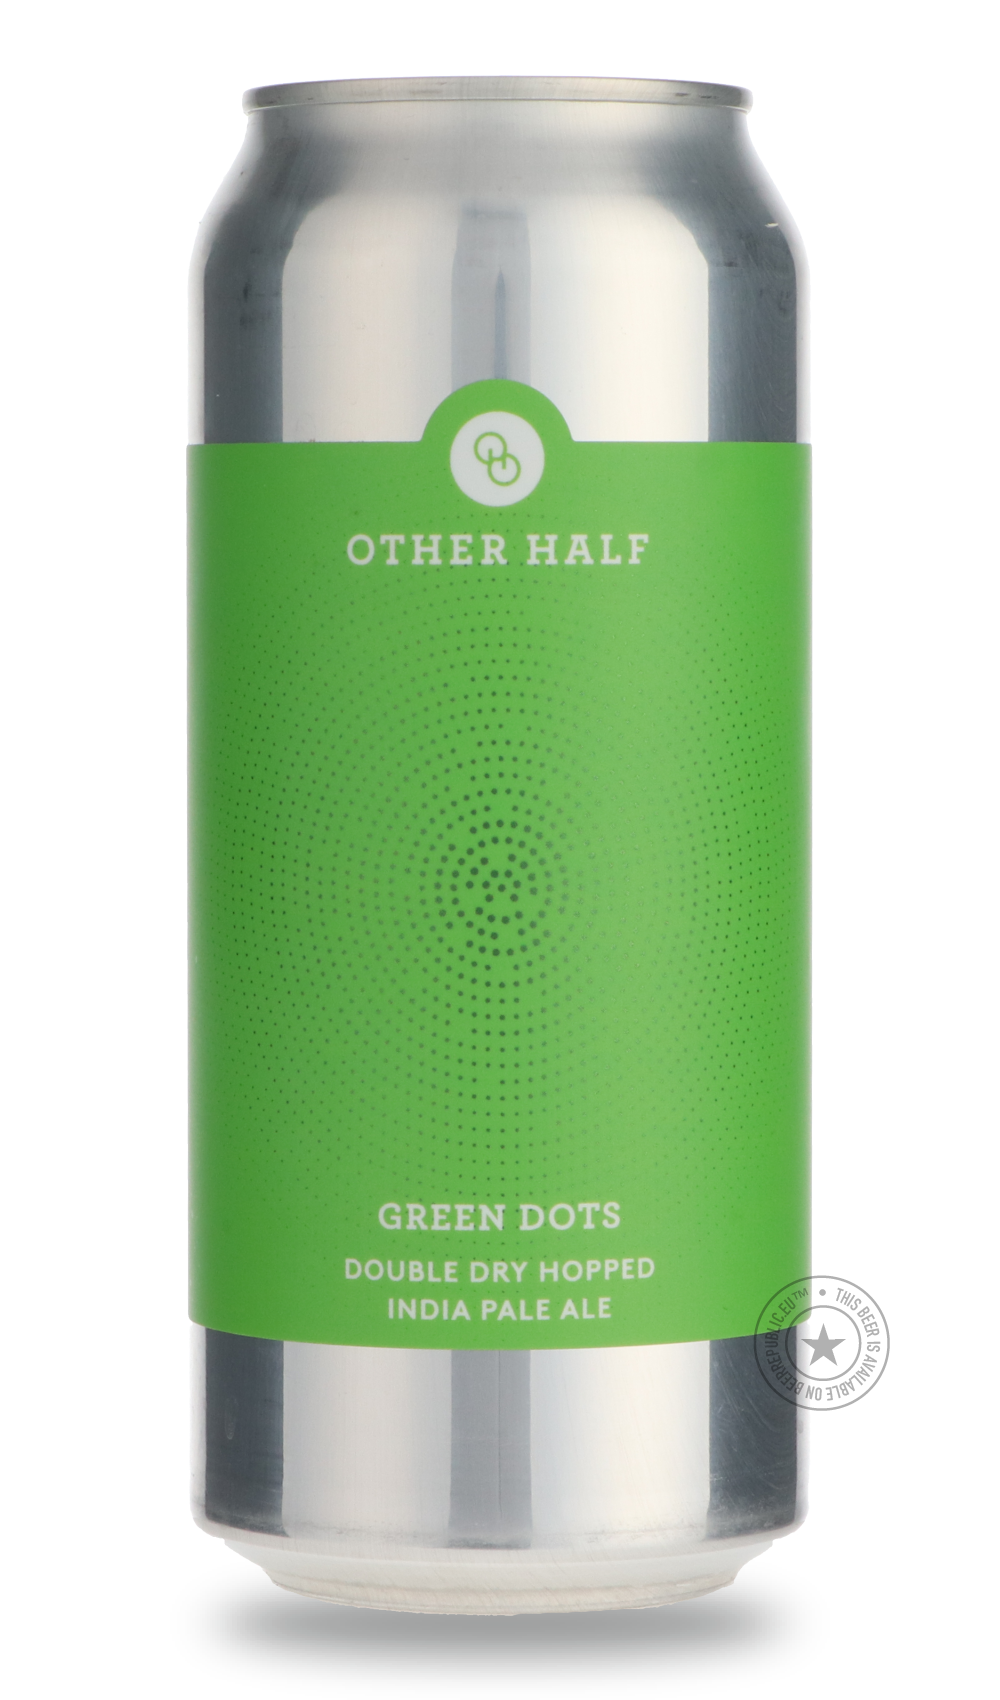 -Other Half- Green Dots-IPA- Only @ Beer Republic - The best online beer store for American & Canadian craft beer - Buy beer online from the USA and Canada - Bier online kopen - Amerikaans bier kopen - Craft beer store - Craft beer kopen - Amerikanisch bier kaufen - Bier online kaufen - Acheter biere online - IPA - Stout - Porter - New England IPA - Hazy IPA - Imperial Stout - Barrel Aged - Barrel Aged Imperial Stout - Brown - Dark beer - Blond - Blonde - Pilsner - Lager - Wheat - Weizen - Amber - Barley Wi